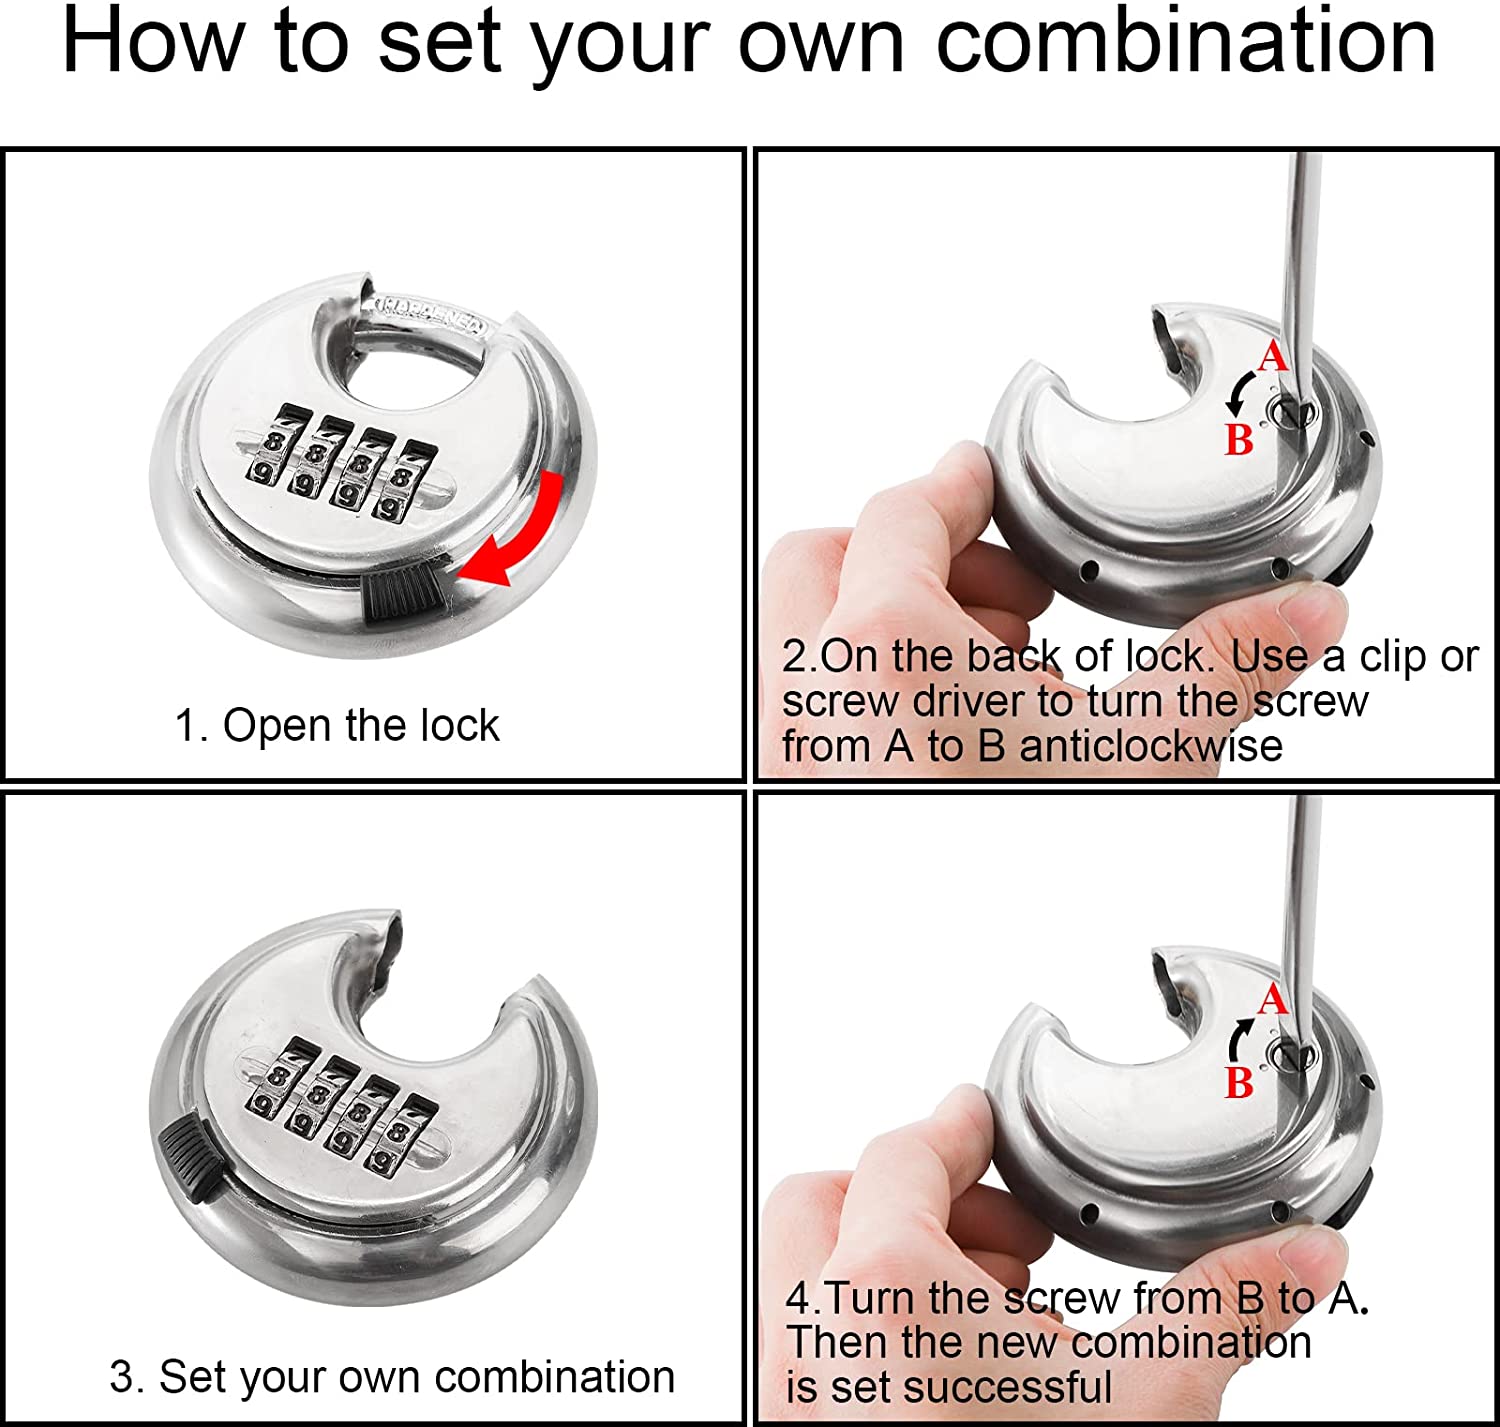 How to reset your disc lock combination?